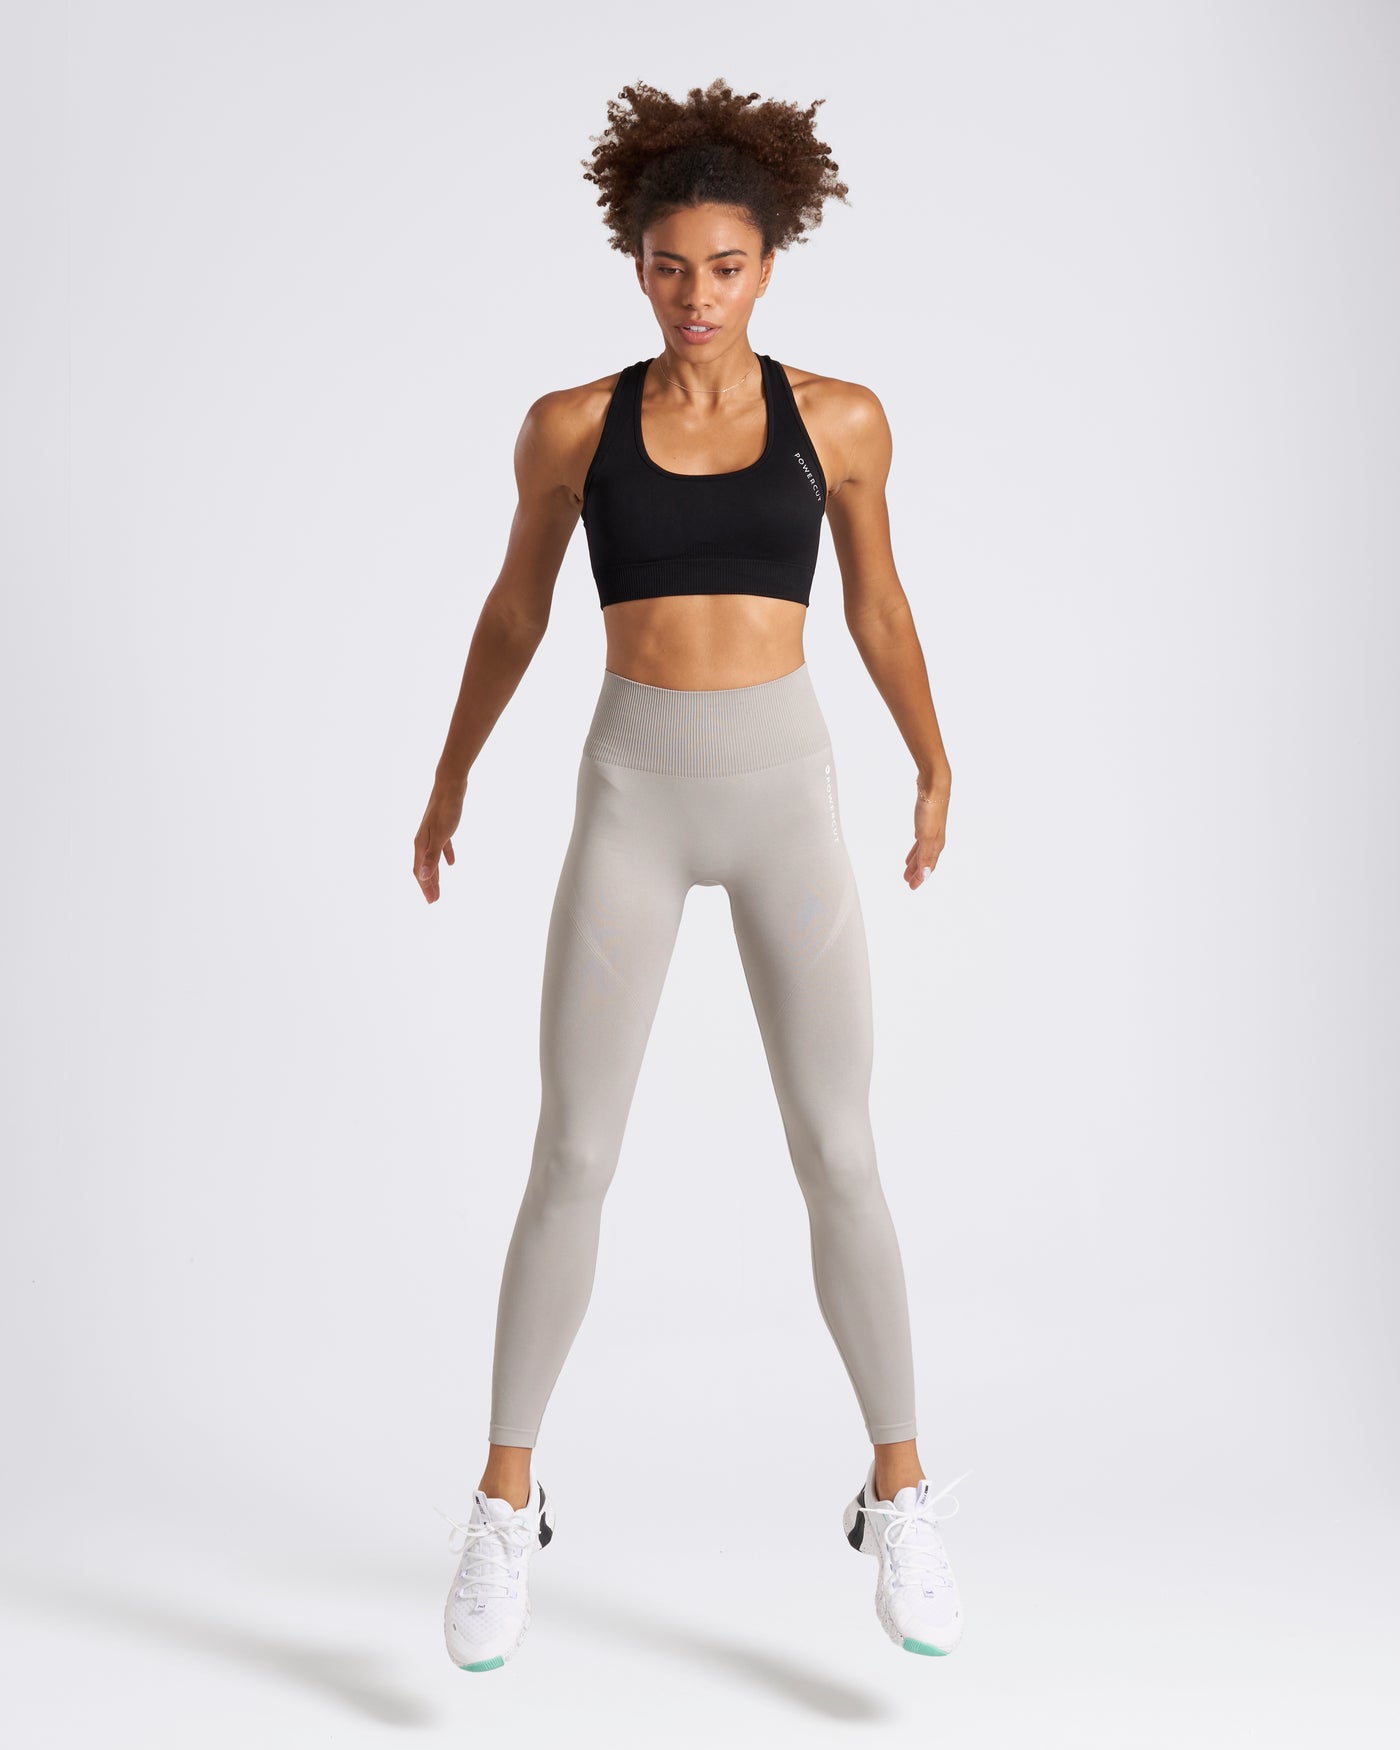 SOLID Seamless Compression Fit Full Length Silver Grey Leggings